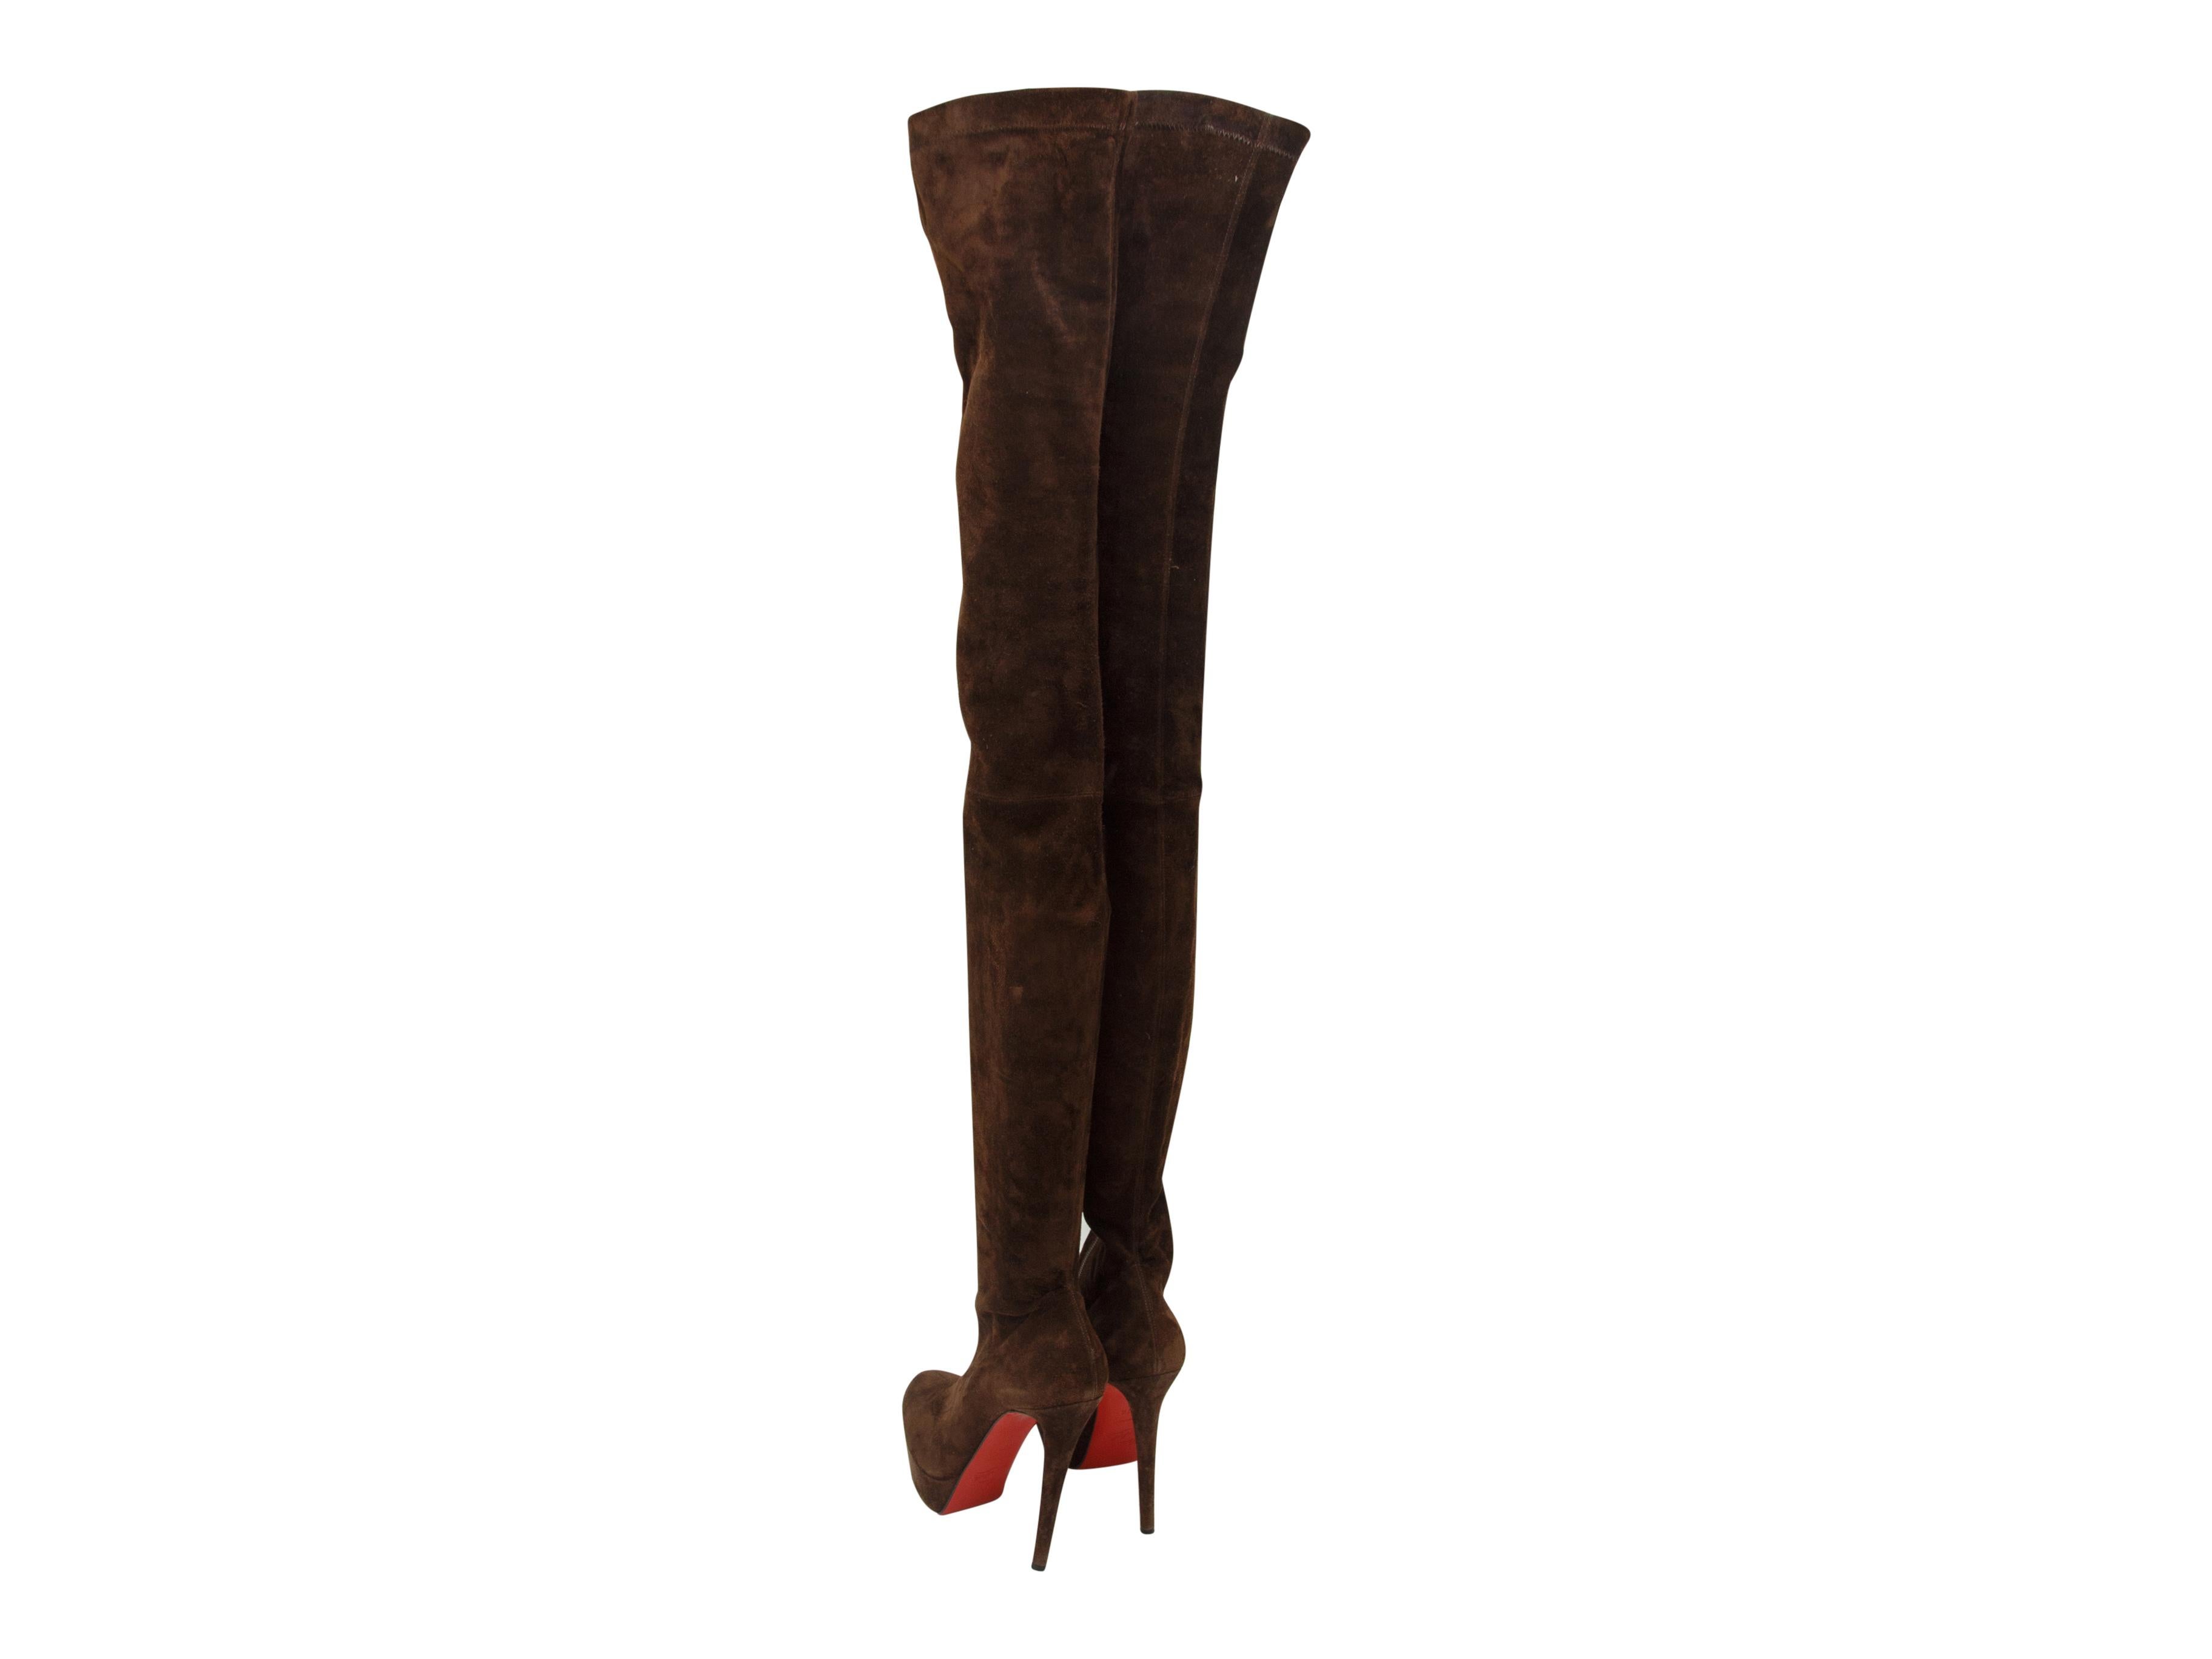 brown suede over the knee boots